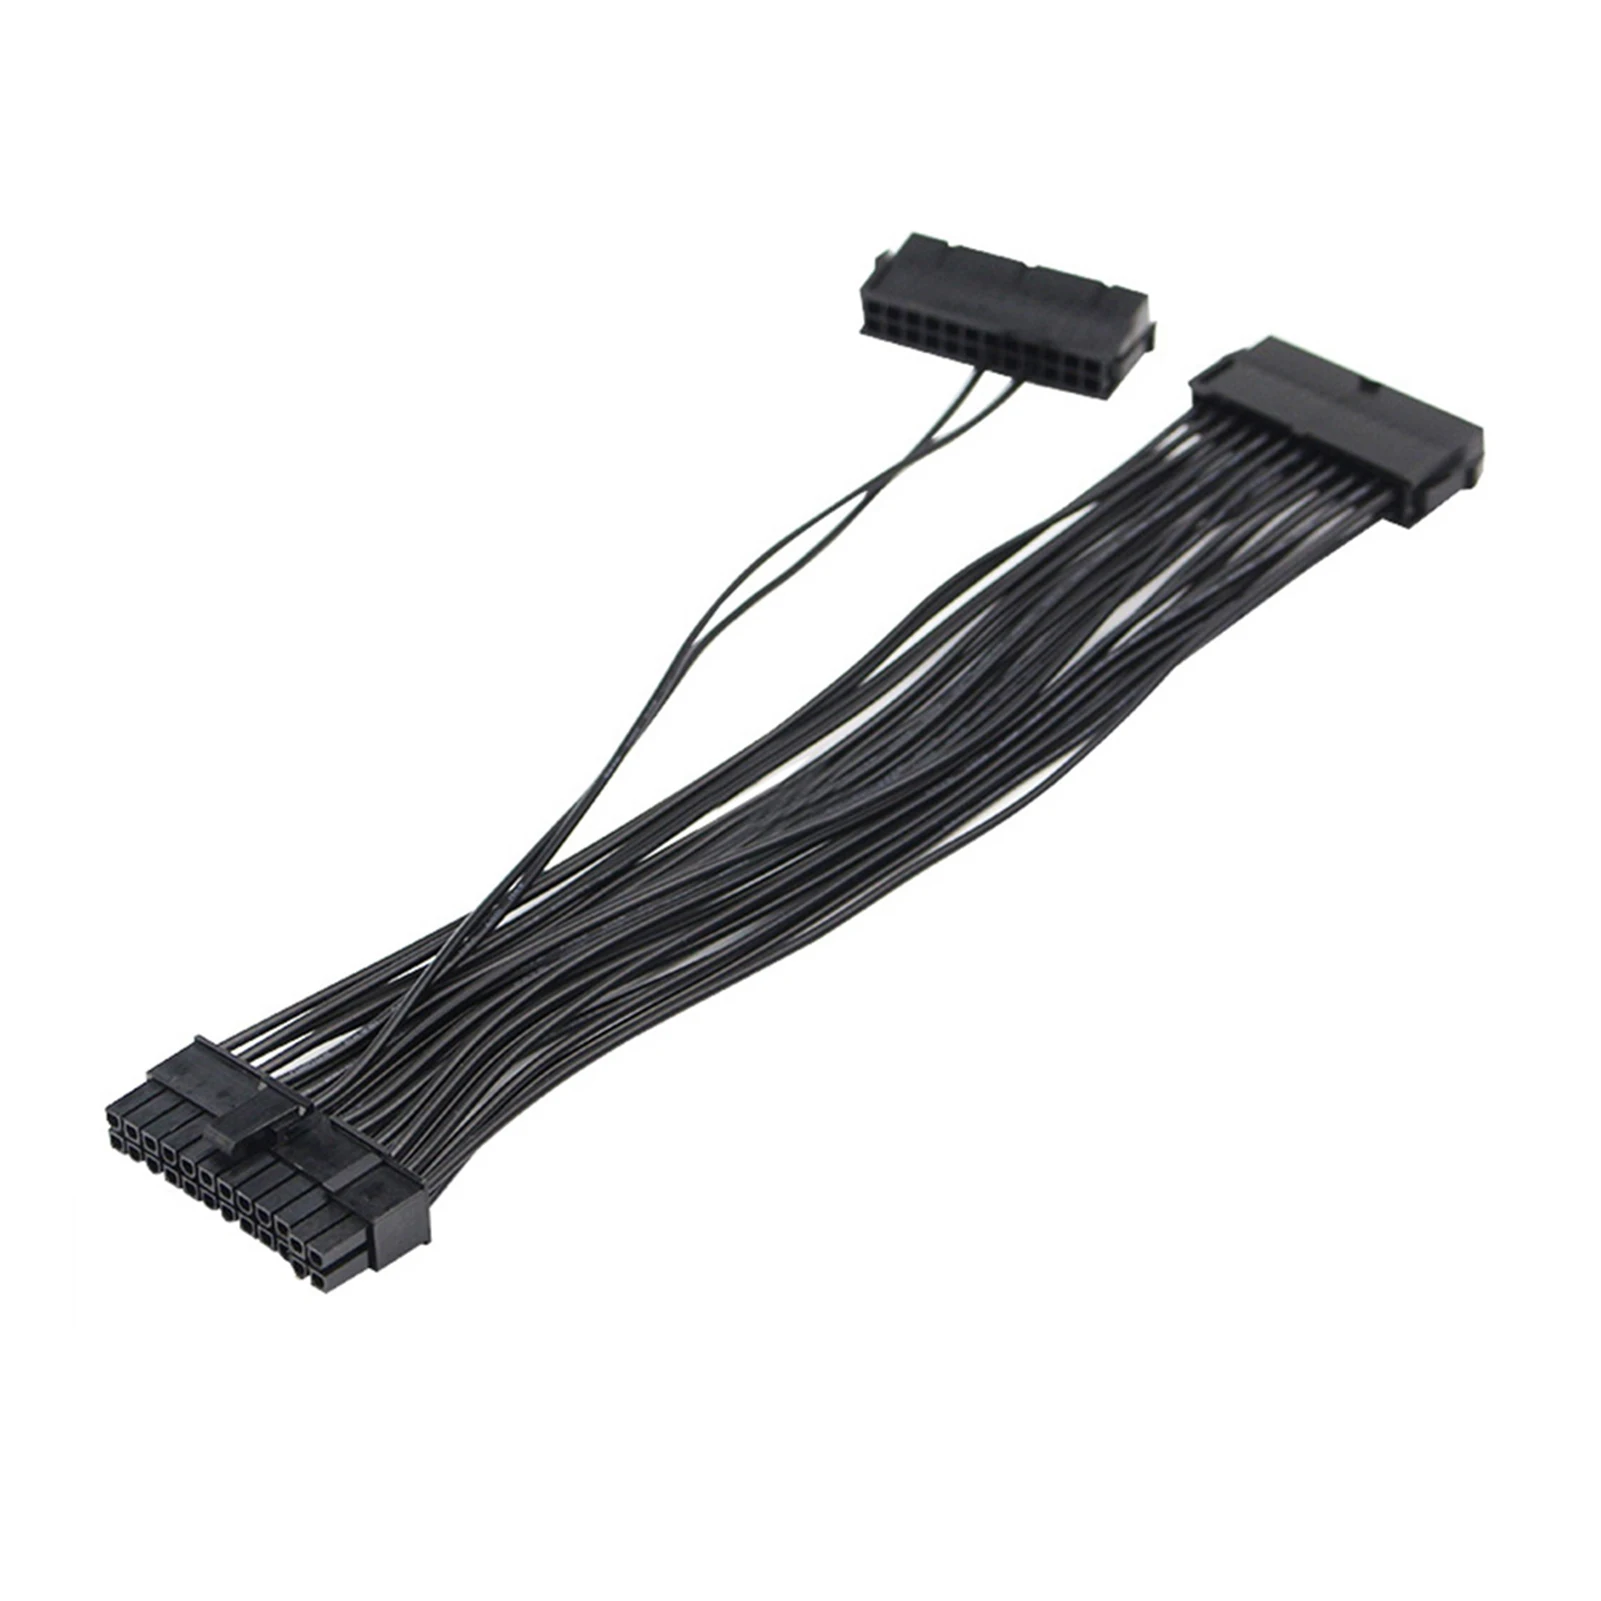 

Hot Sale 1/5pcs New 24Pin 20+4pin Dual PSU ATX Power Supply Adaptor Cable Connector For Mining 30cm